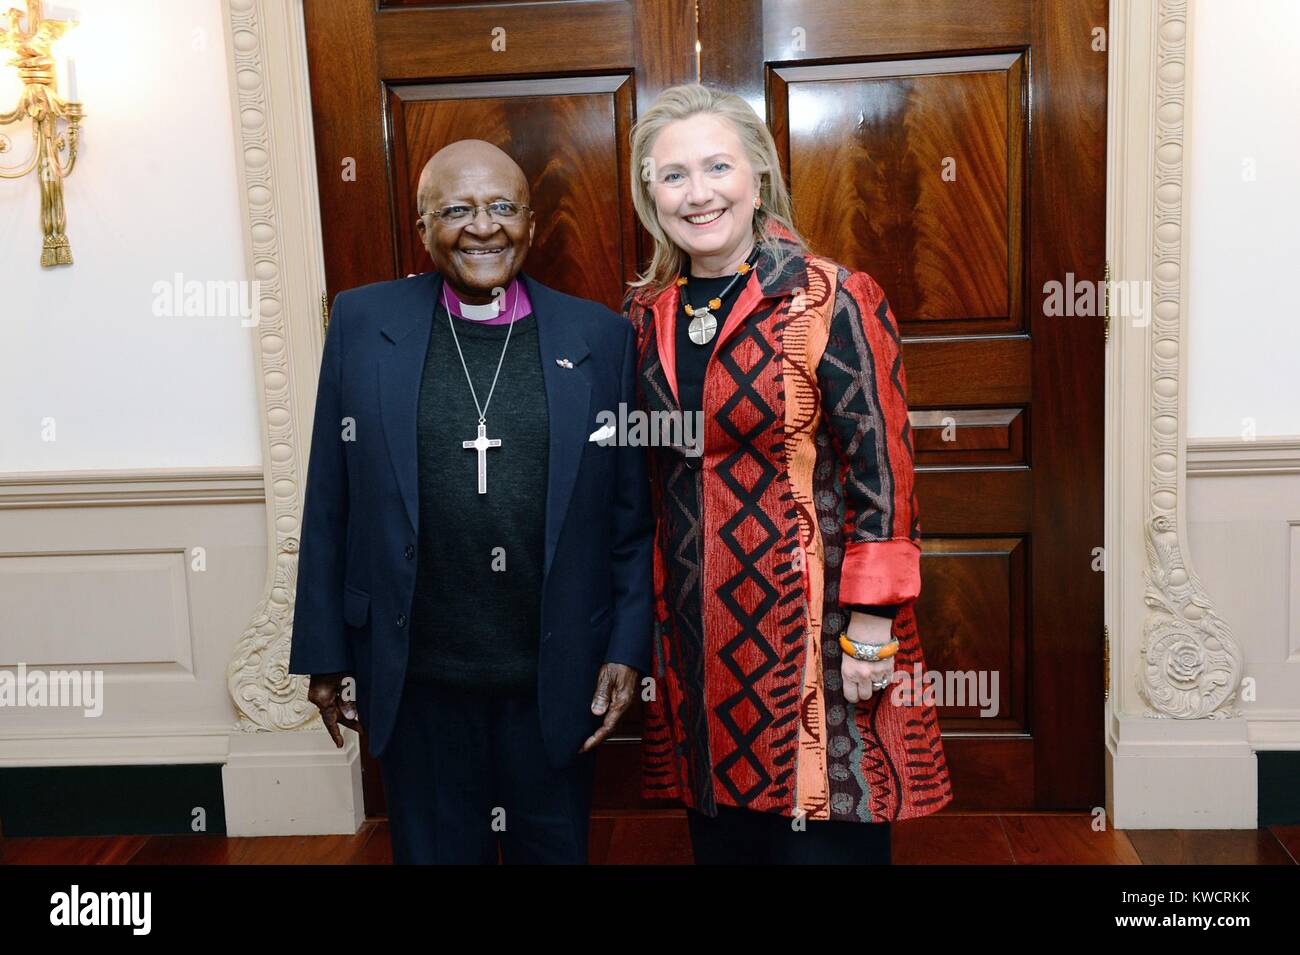 Secretary of State Hillary Rodham Clinton meets with Archbishop Desmond Tutu. Oct. 10, 2012. Tutu was the first black Archbishop of Cape Town of the Anglican Church of Southern Africa. He received the Nobel Peace Prize in 1984 for his opposition to apartheid. (BSLOC 2015 3 66) Stock Photo